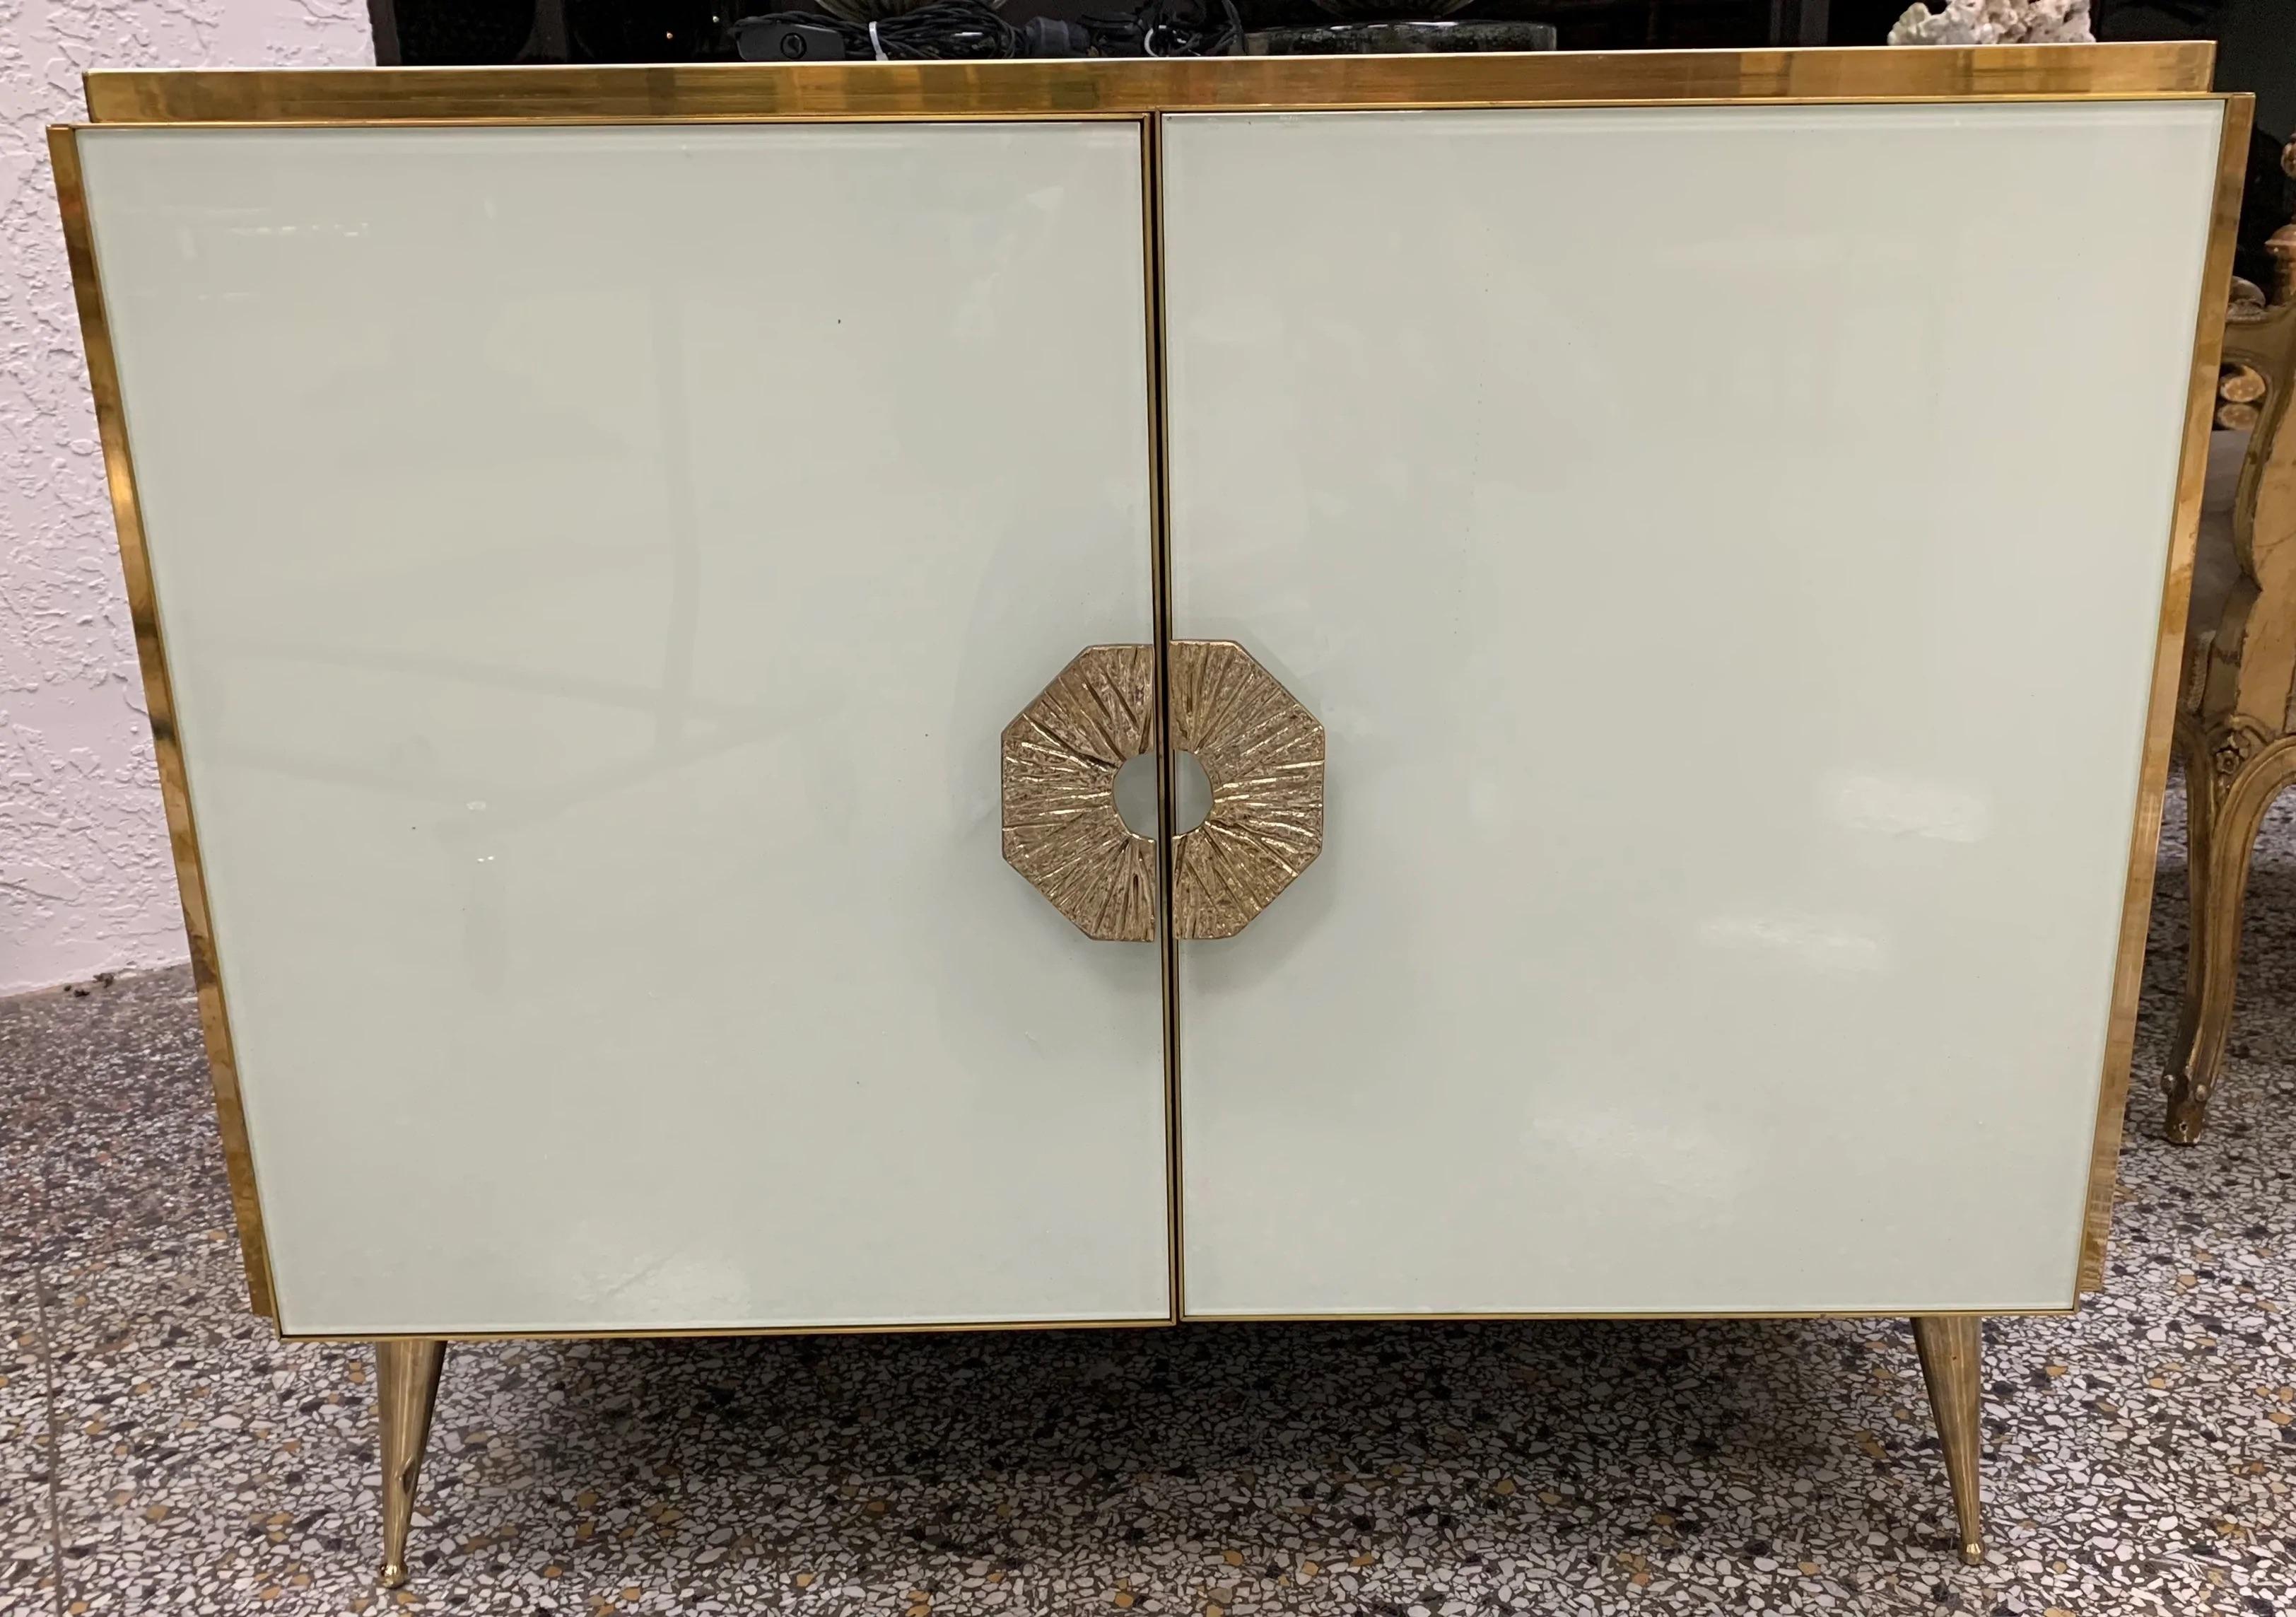 What a gorgeous pair of modern Murano Italian glass and brass side cabinets or sideboards. This beautiful pair has been carefully handblown and crafted in Murano, Italy. These cabinets feature brass legs, handles, edges and brass details throughout